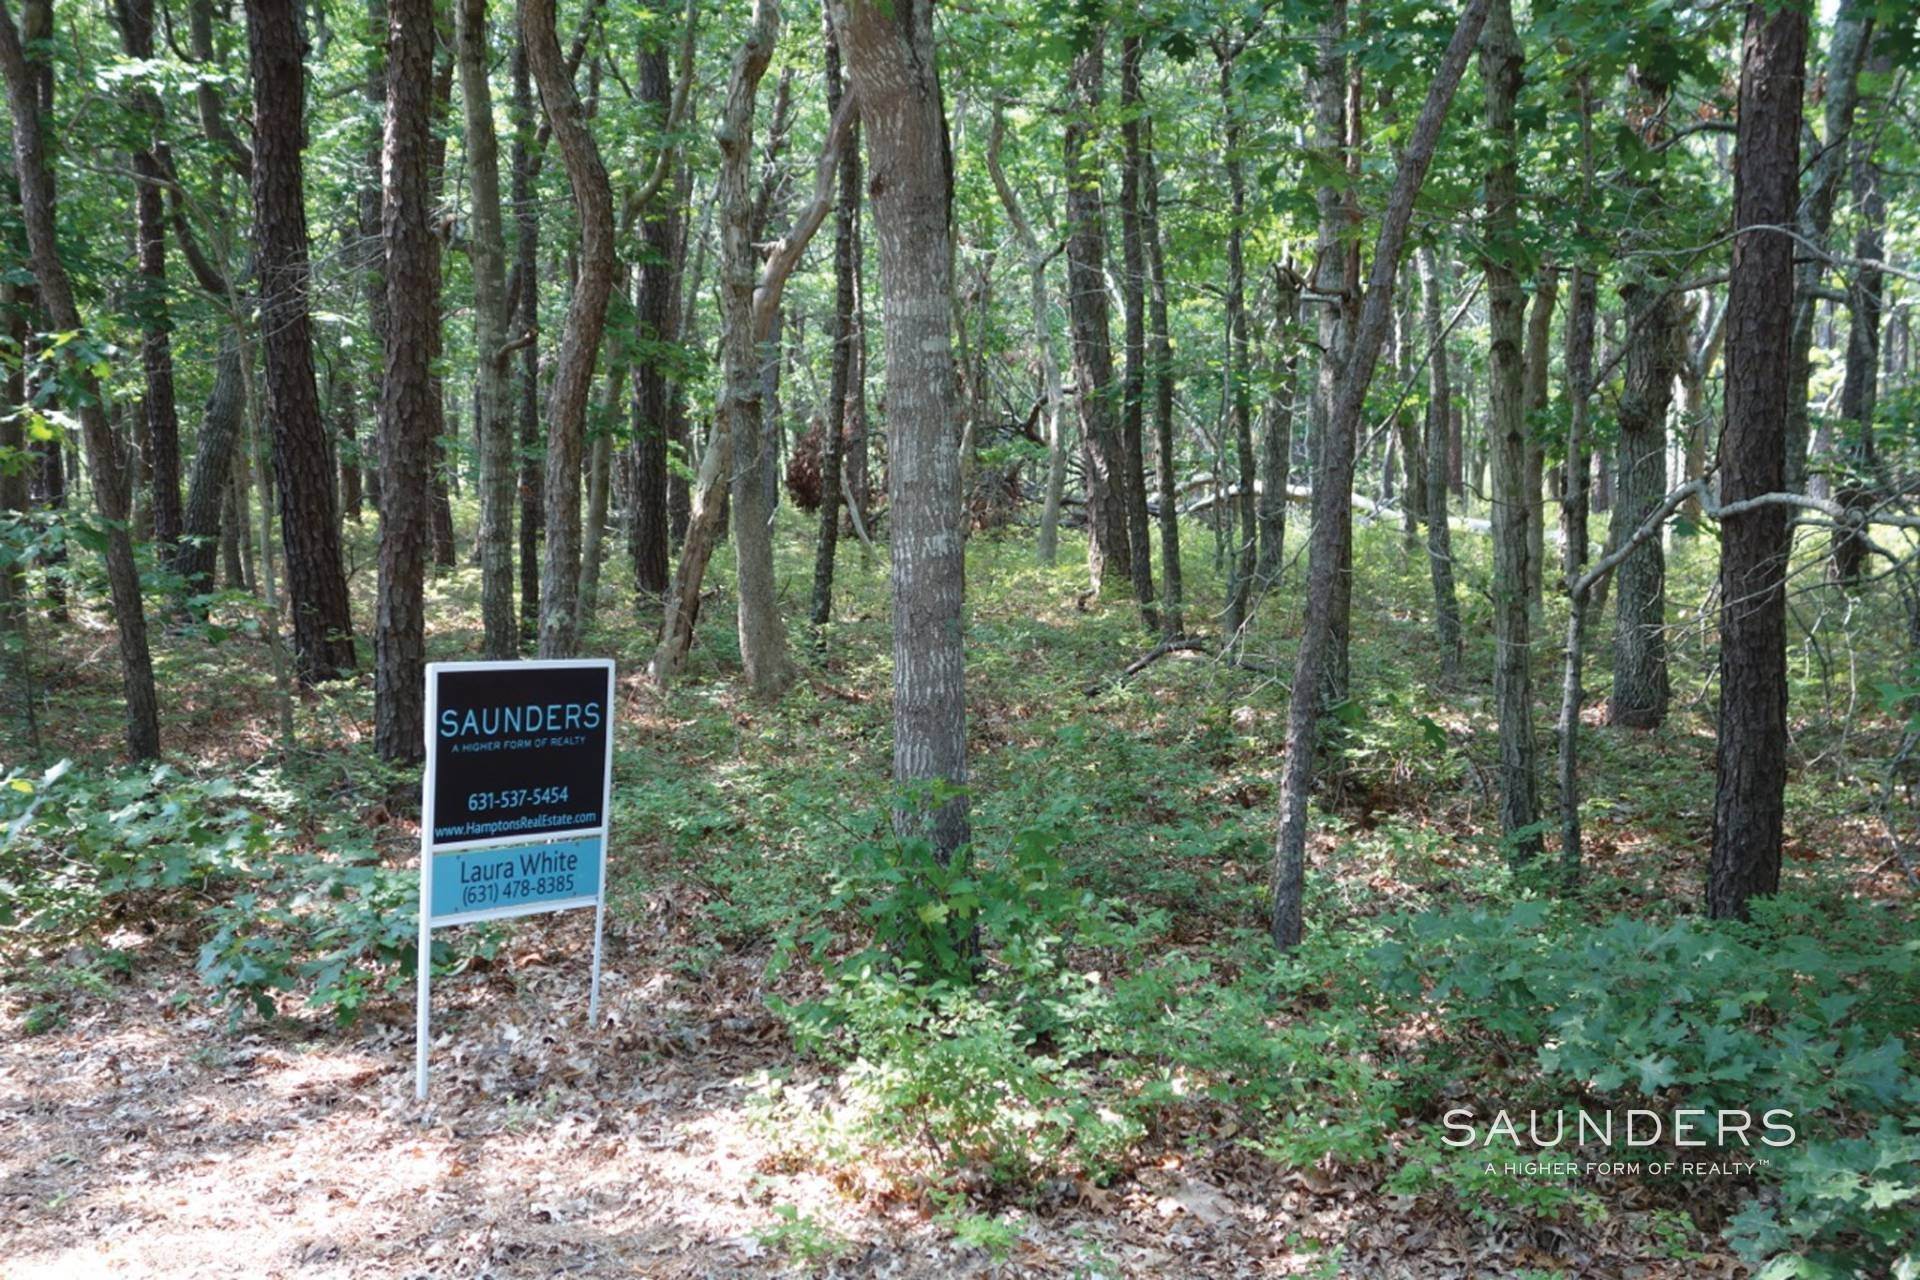 5. Land for Sale at Now Reduced - Rare Wainscott Vacant Parcel 10 Broadwood Court, Wainscott, NY 11975